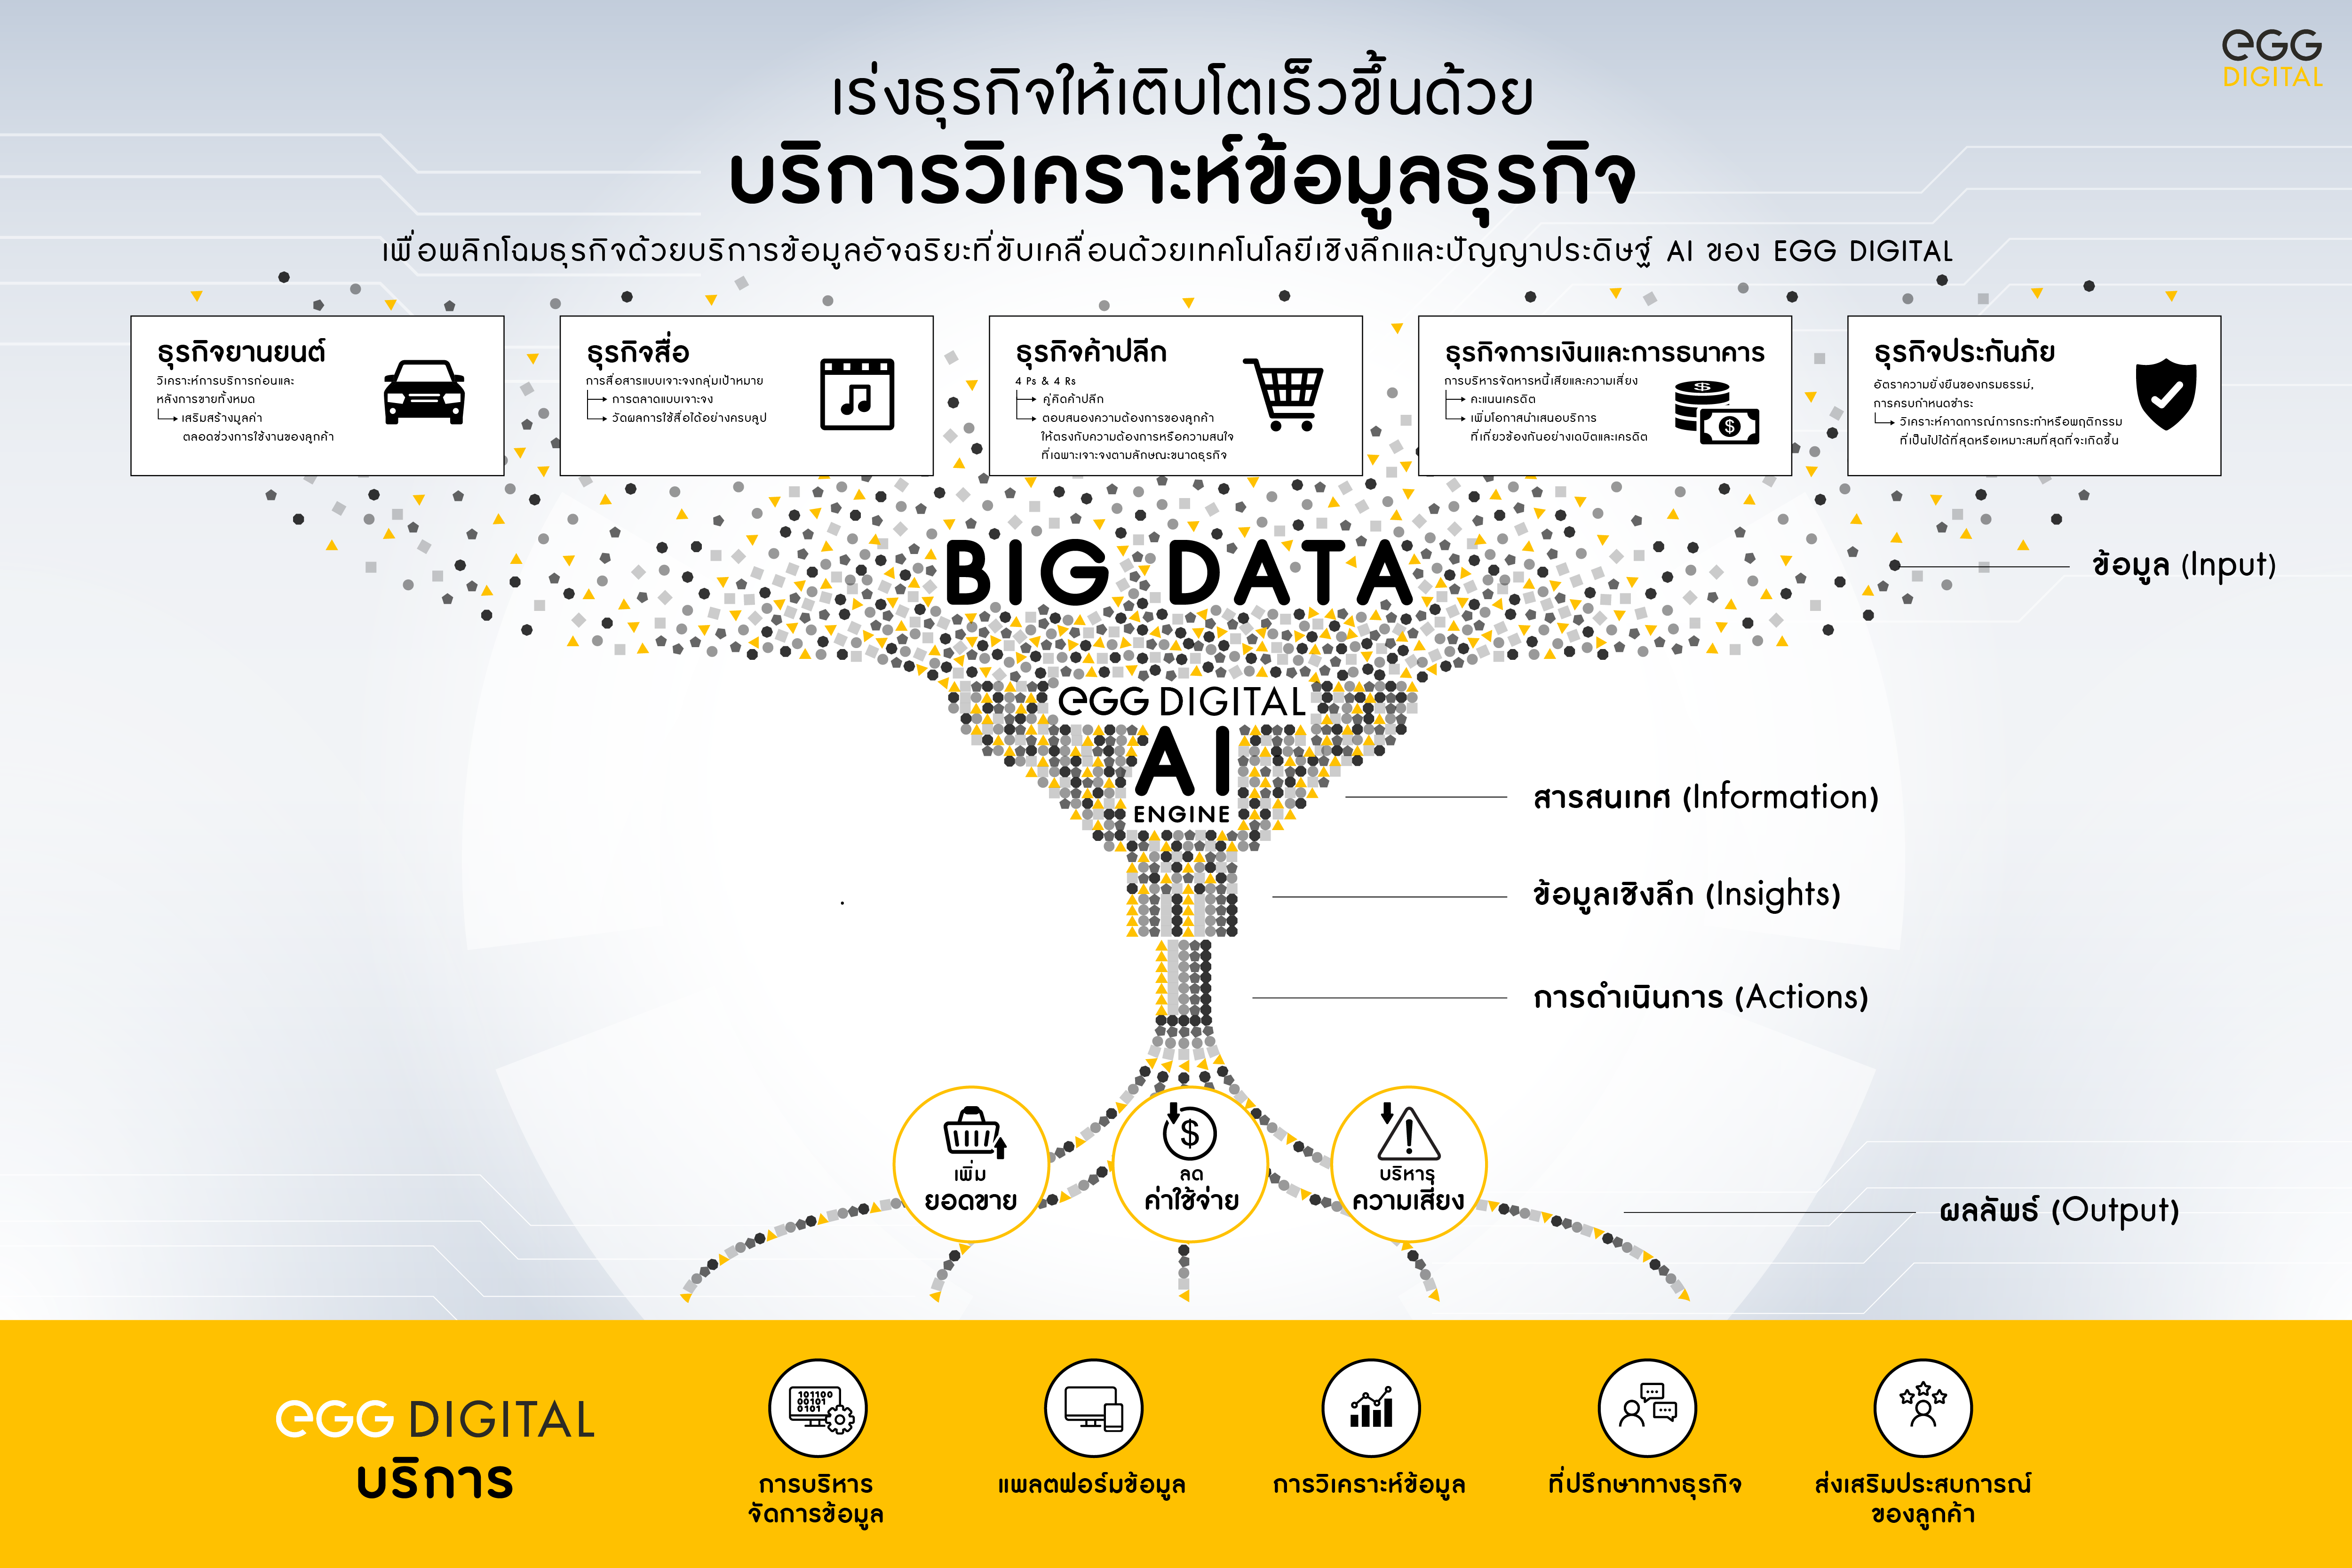 3. EGG Digital_Business Analytics as a Service – Powered by AI Engine_Infographic_TH_0